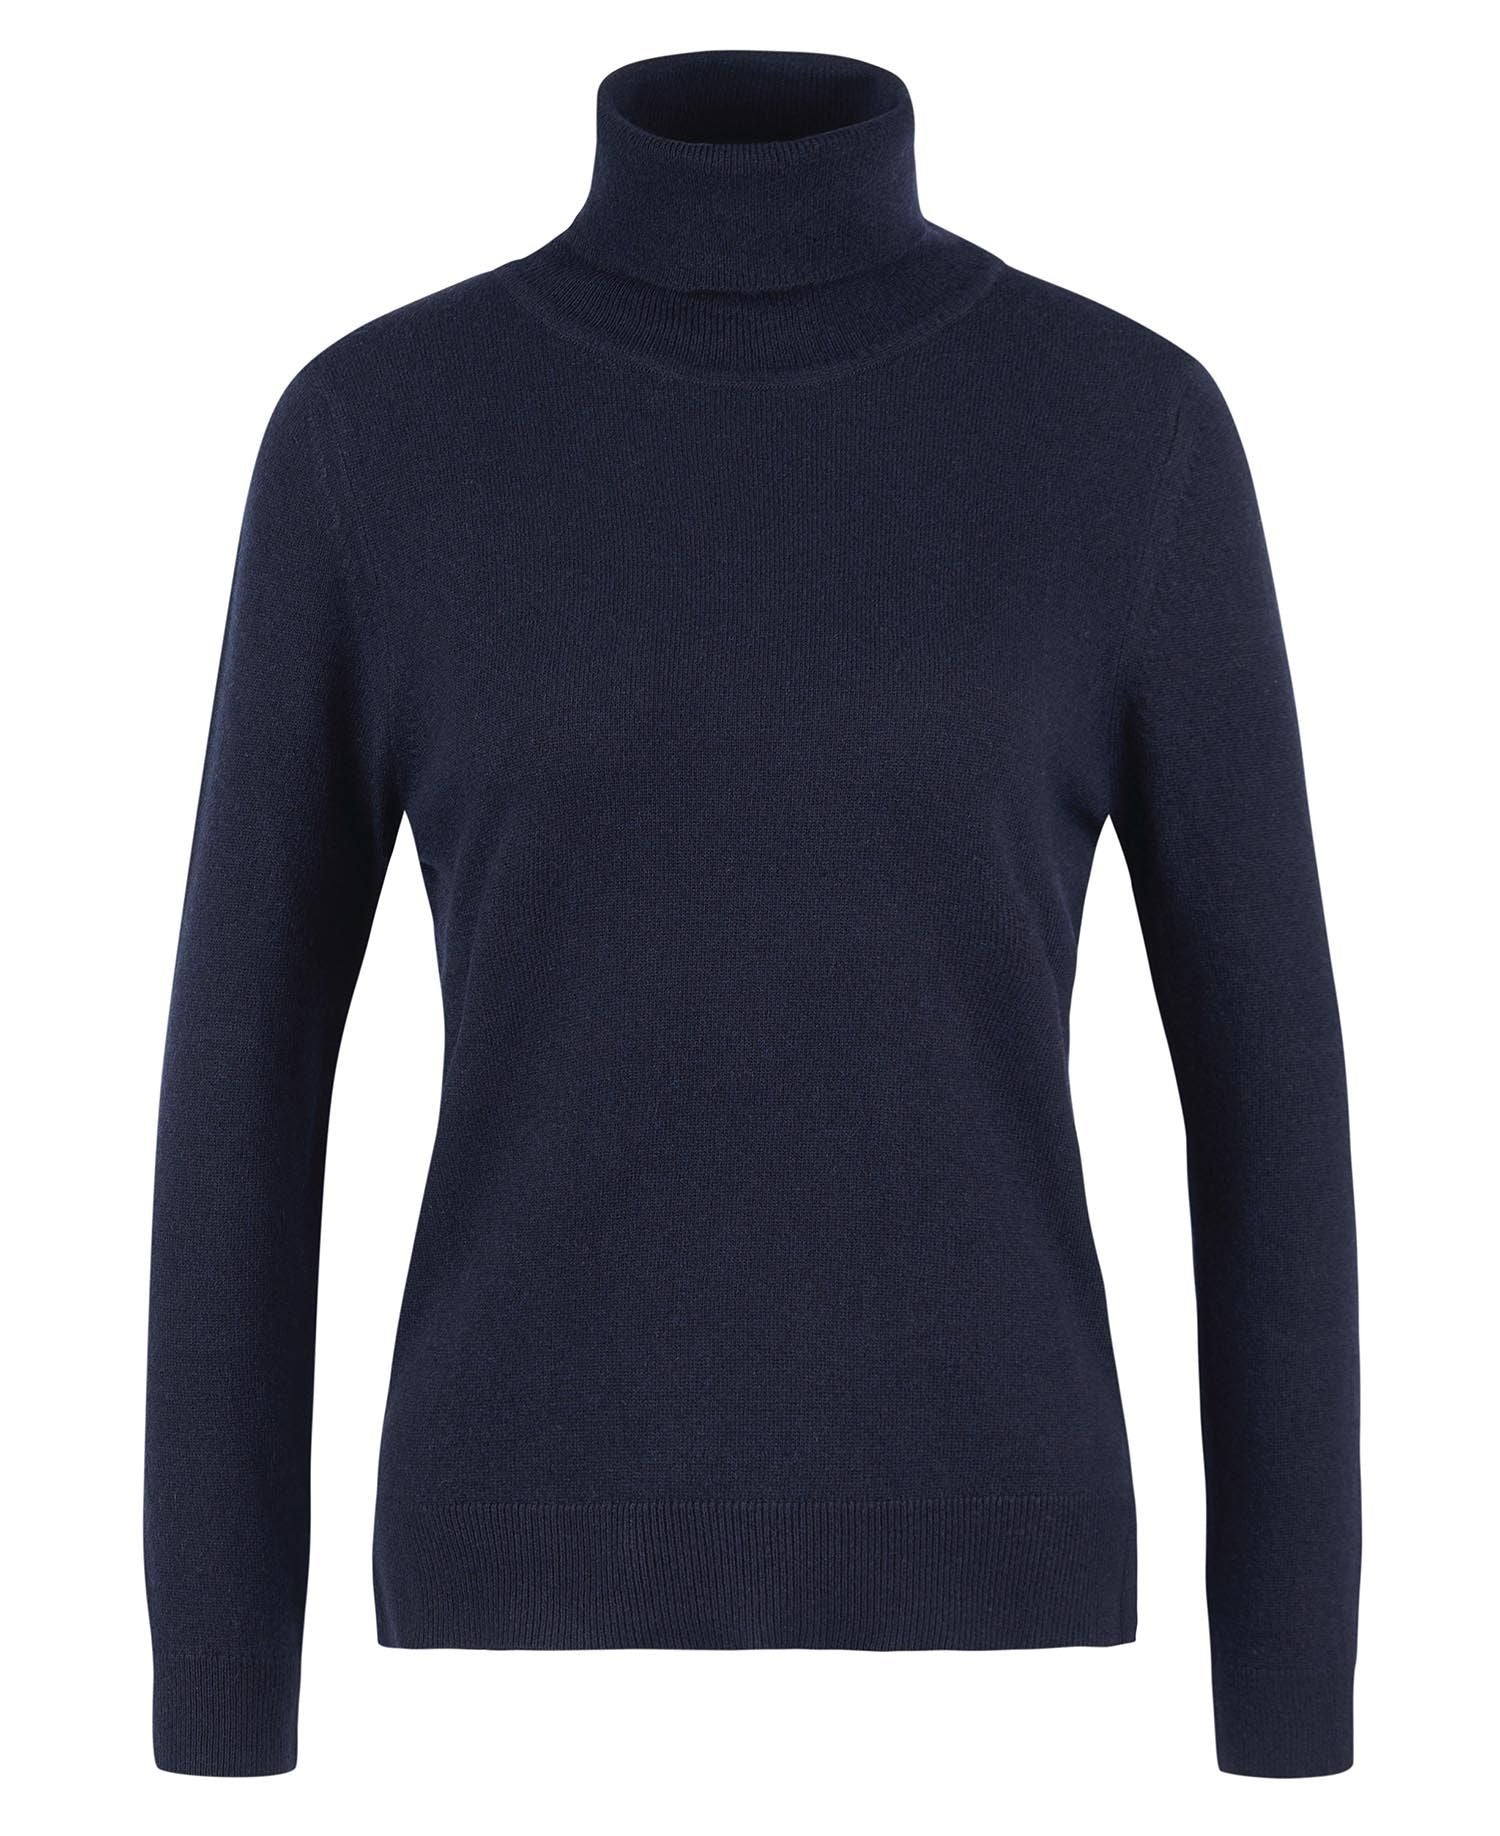 Barbour Pendle Roll Neck Navy